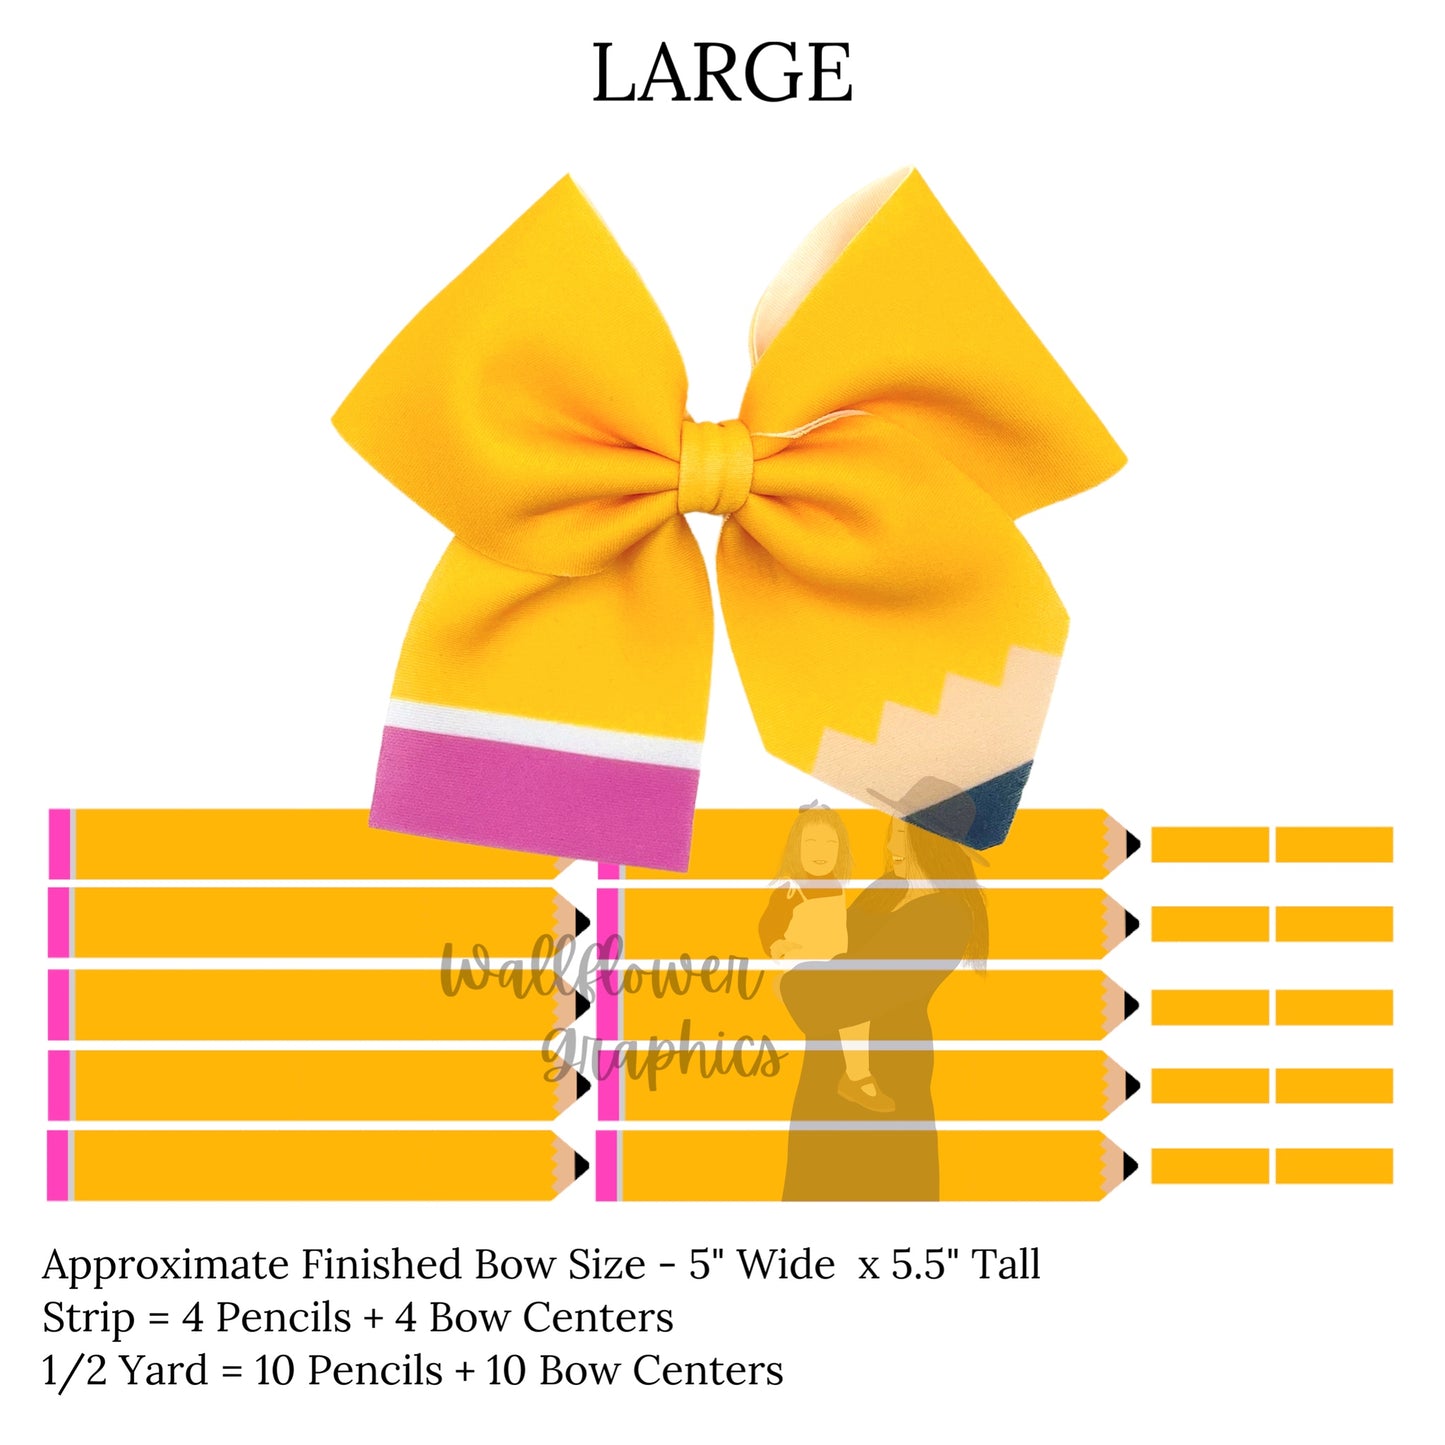 Back to school yellow pencil themed neoprene sailor hair bows - large.